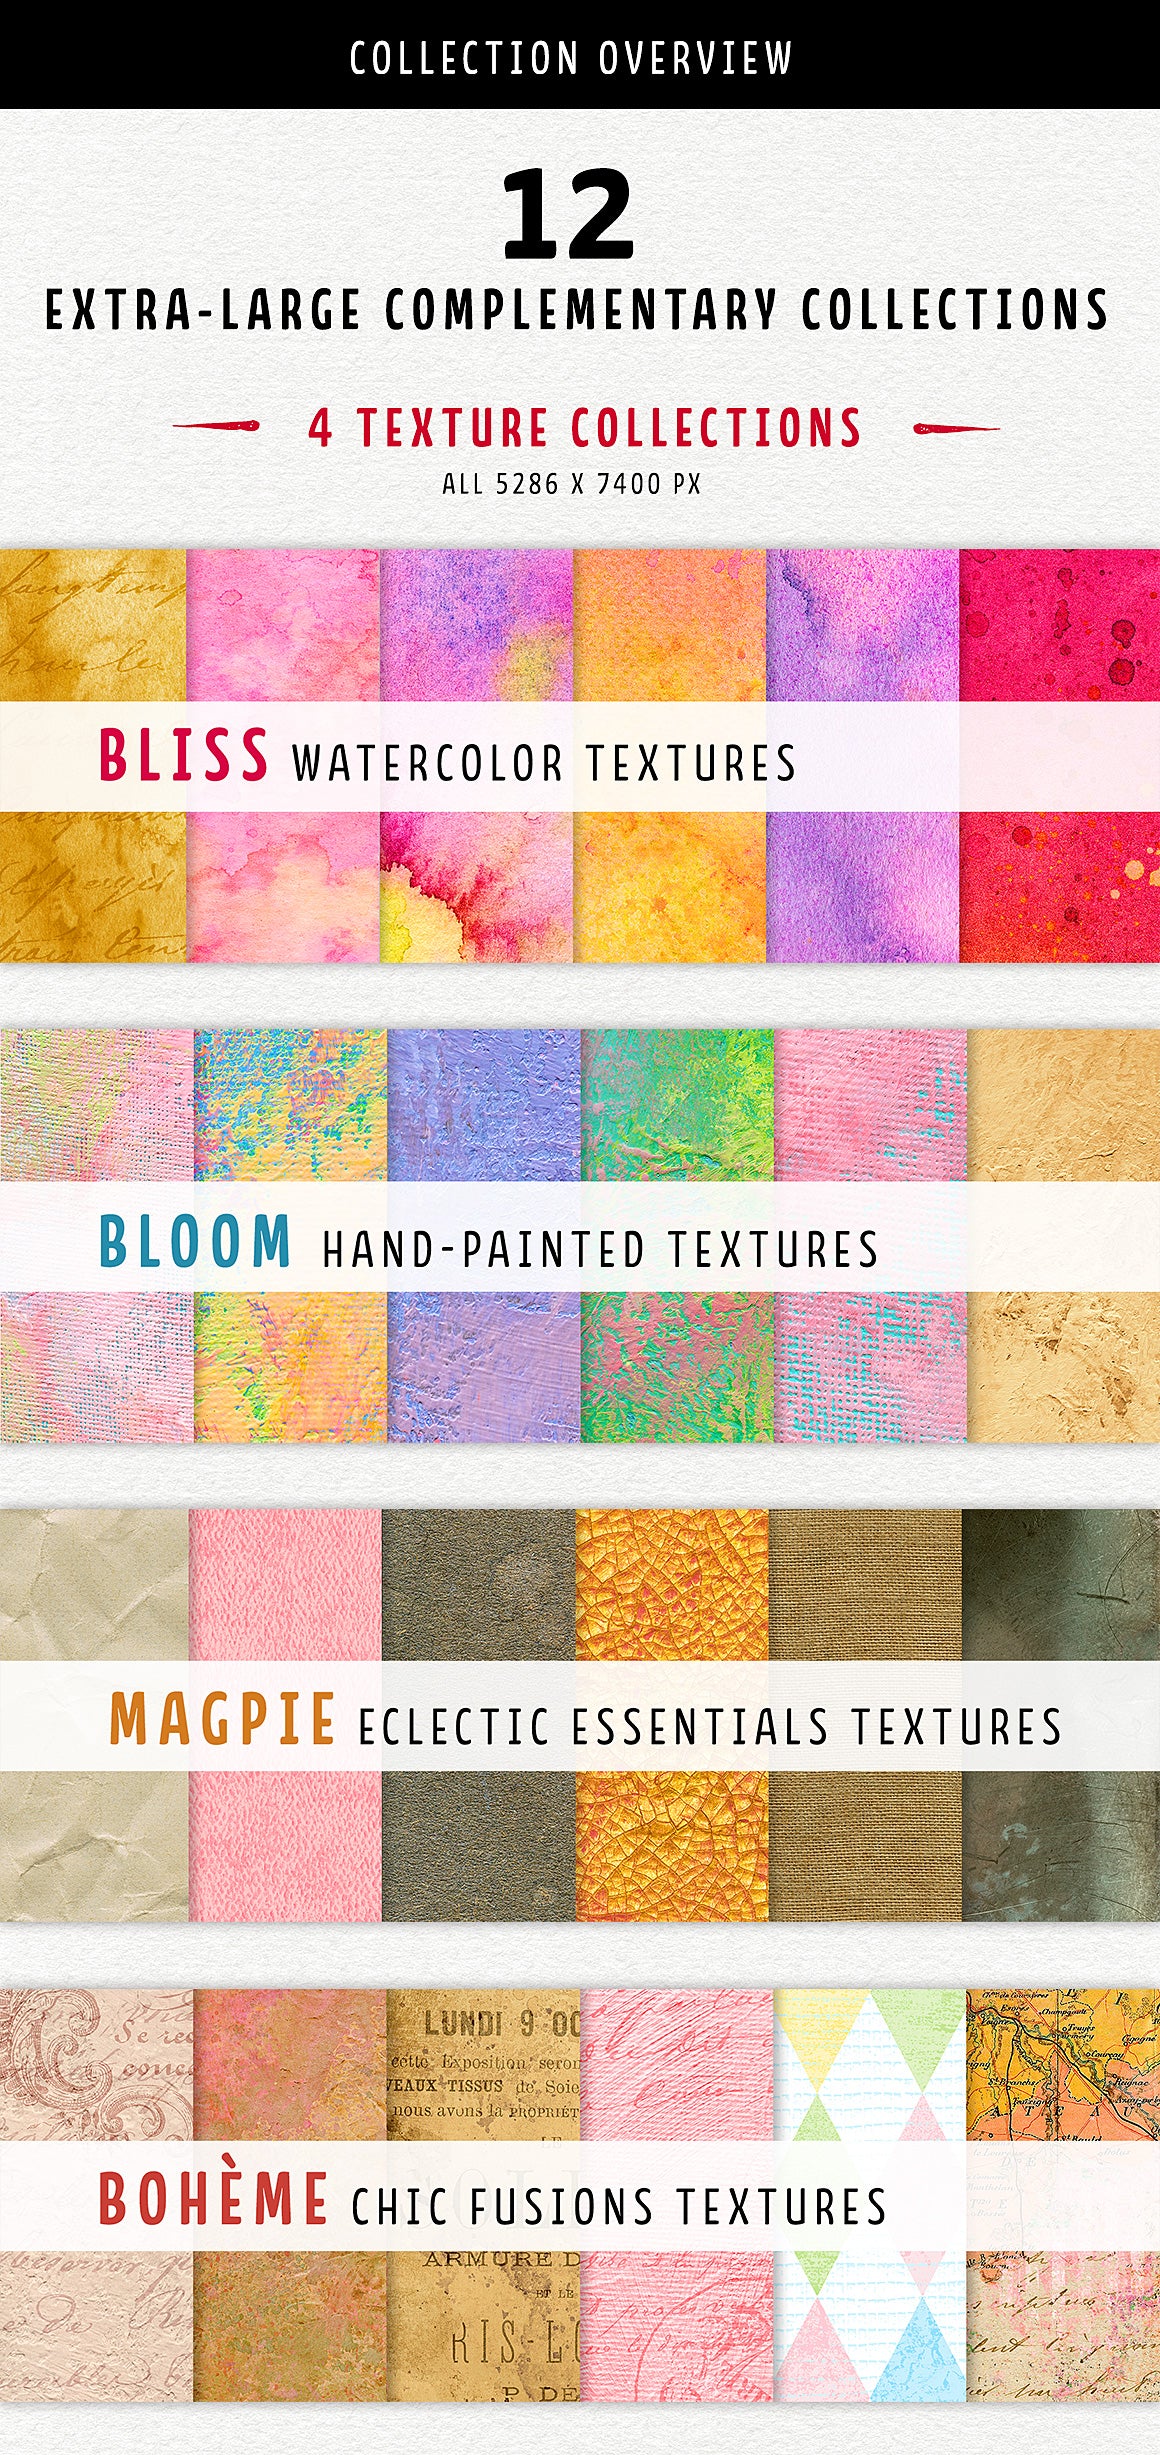 4 unique texture collections in the Complete Inspirational Texture and Elements Collection.